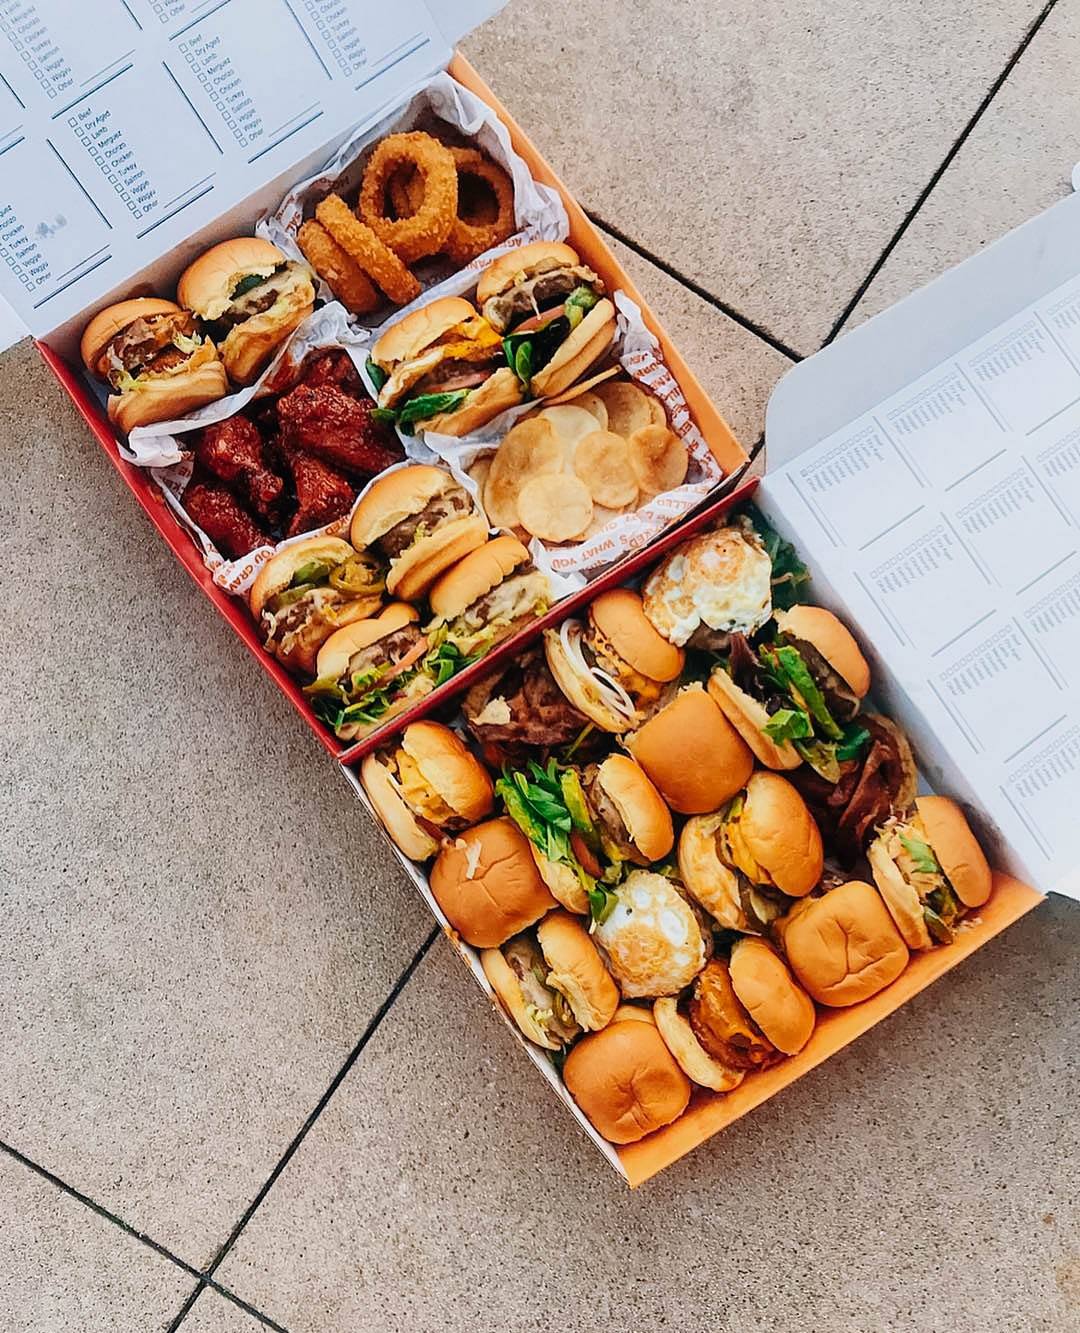 60299795 2444818375562395 6604084994438594560 o The new restaurant, Burgerim coming to Birmingham will make you question every burger you’ve ever eaten